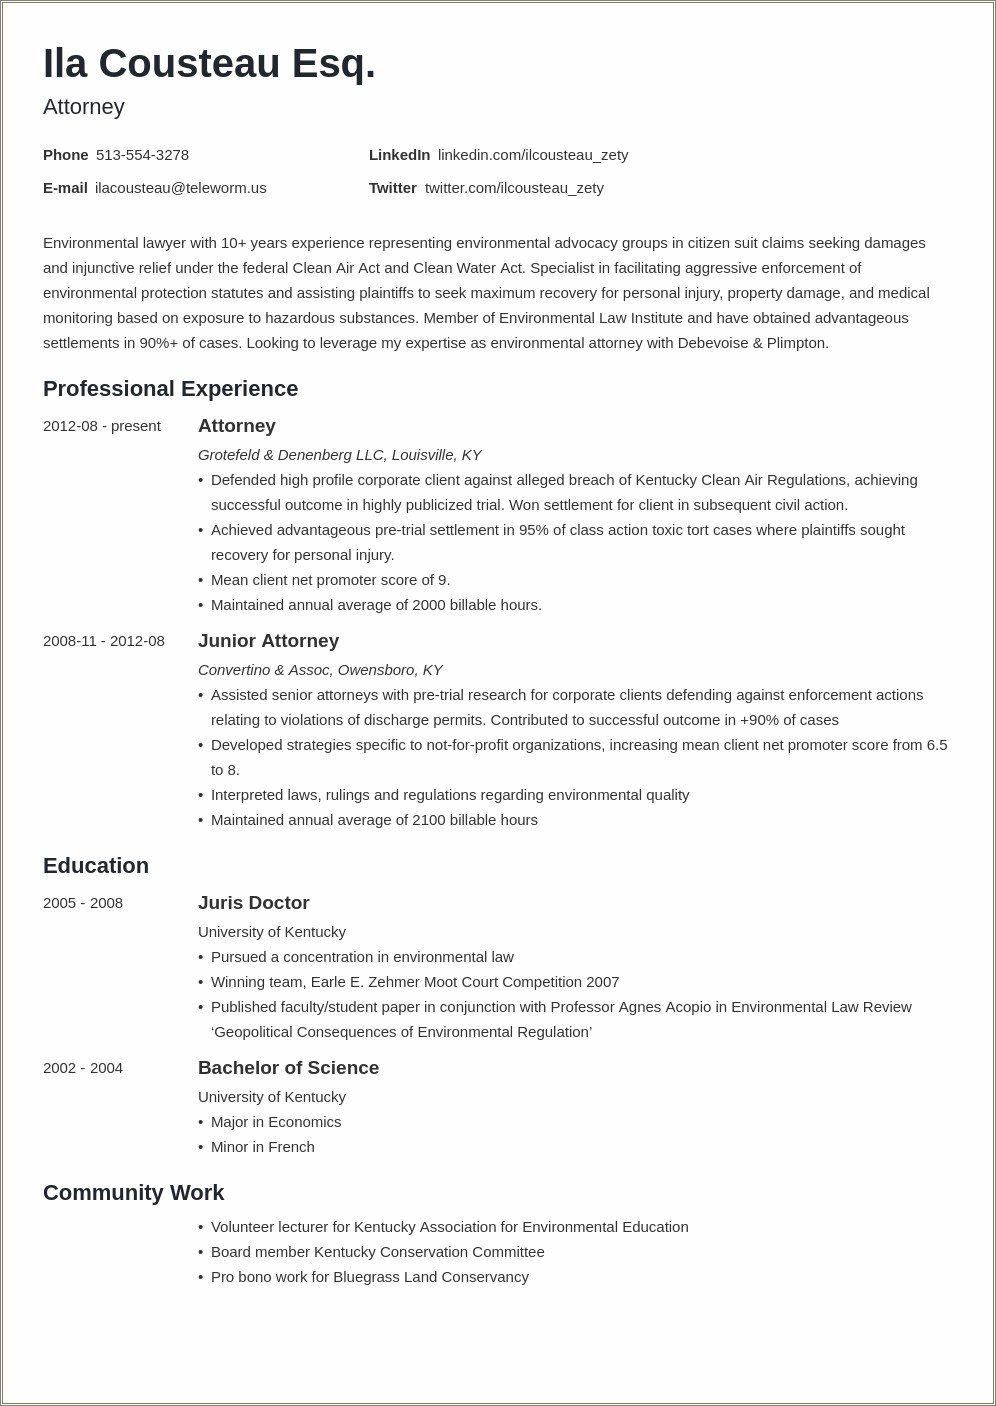 Sample Resume About Personal Injury Attorney